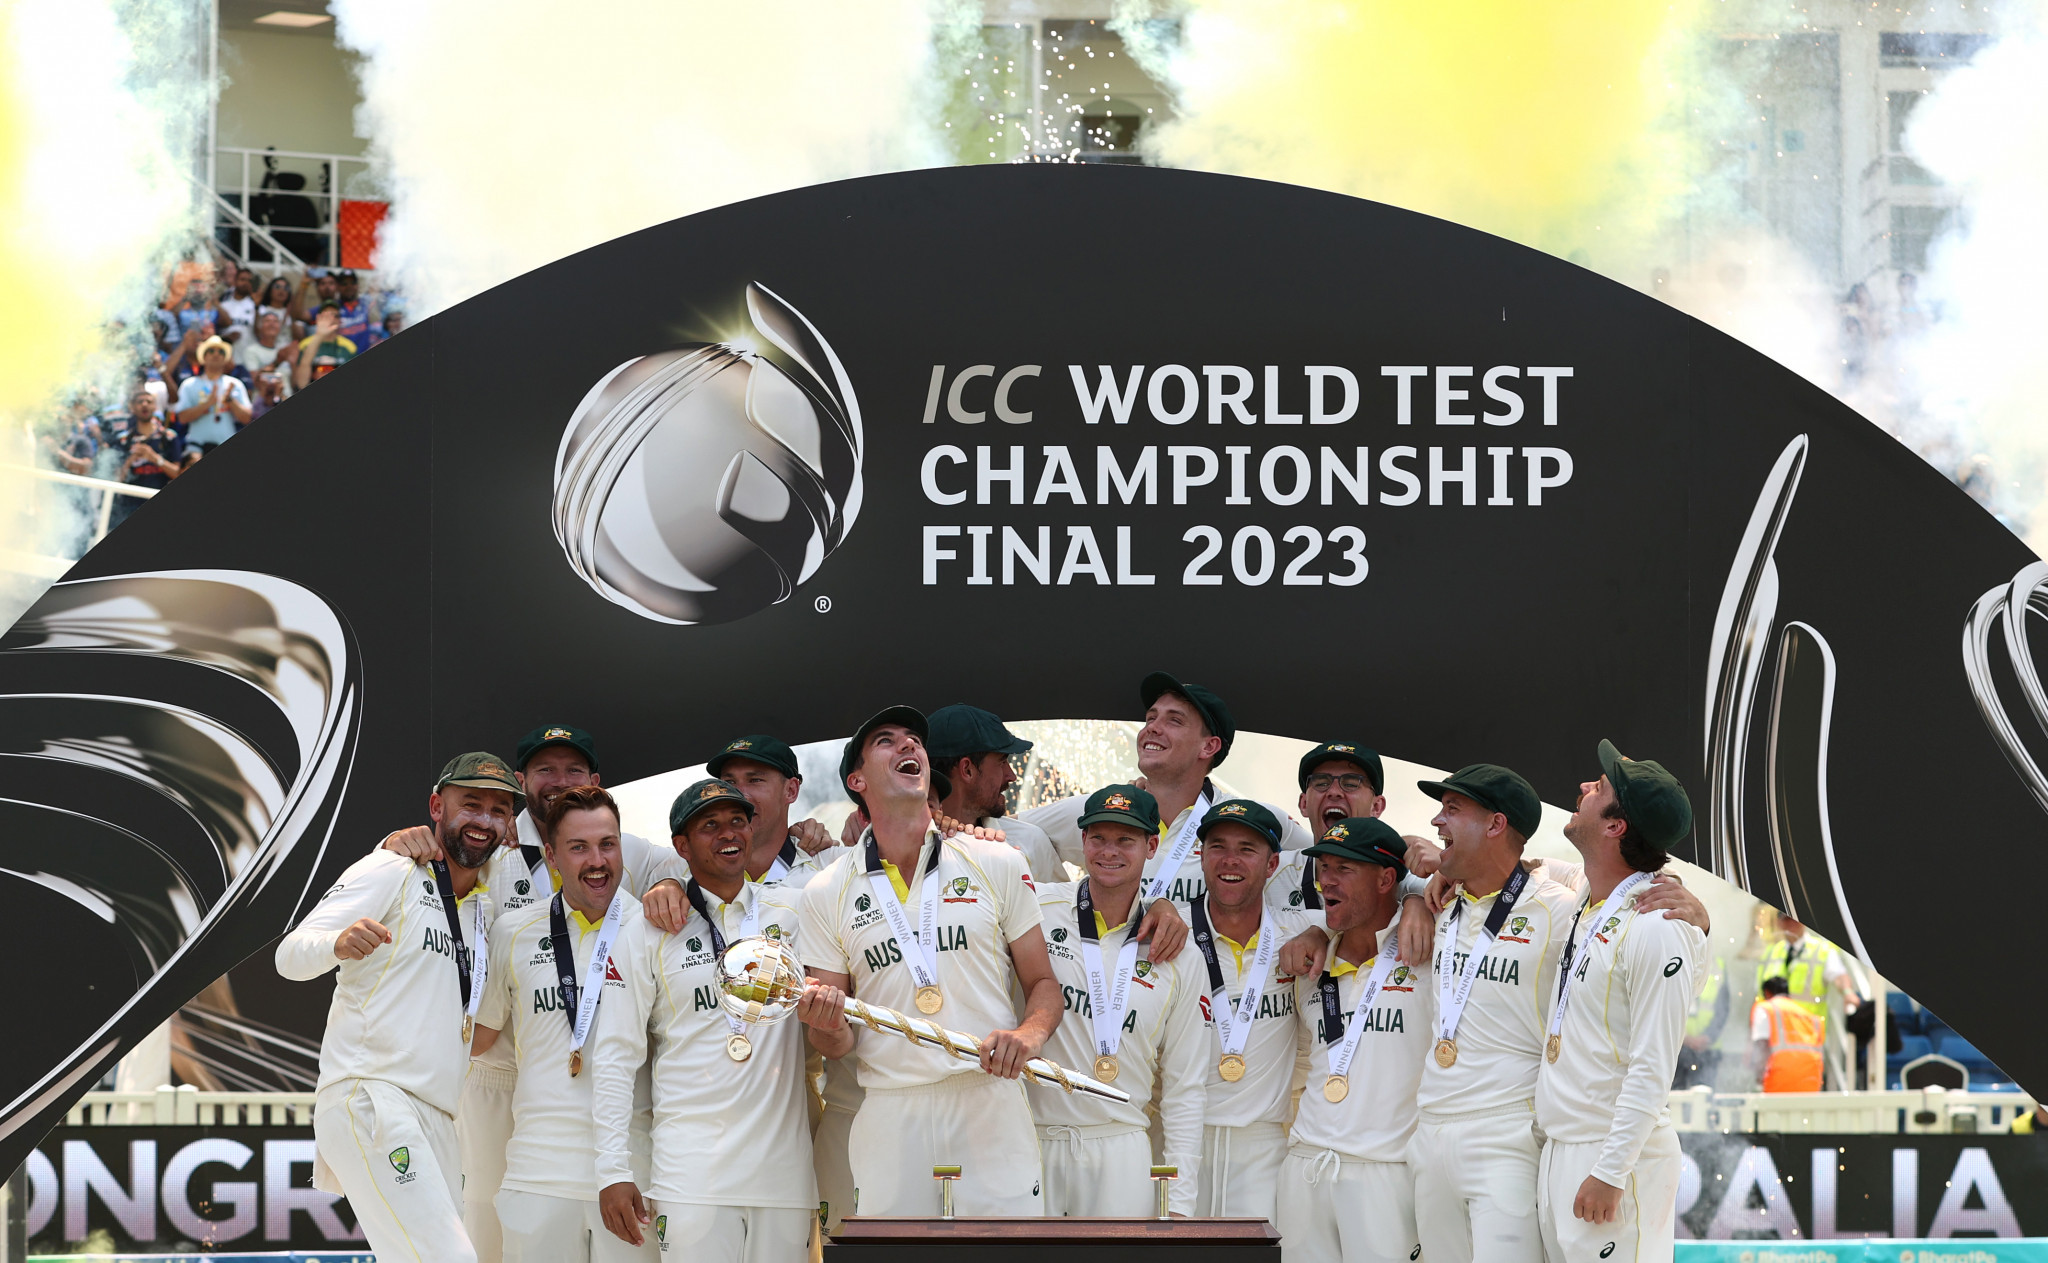 Australia claim ICC World Test Championship title after comfortable win over India